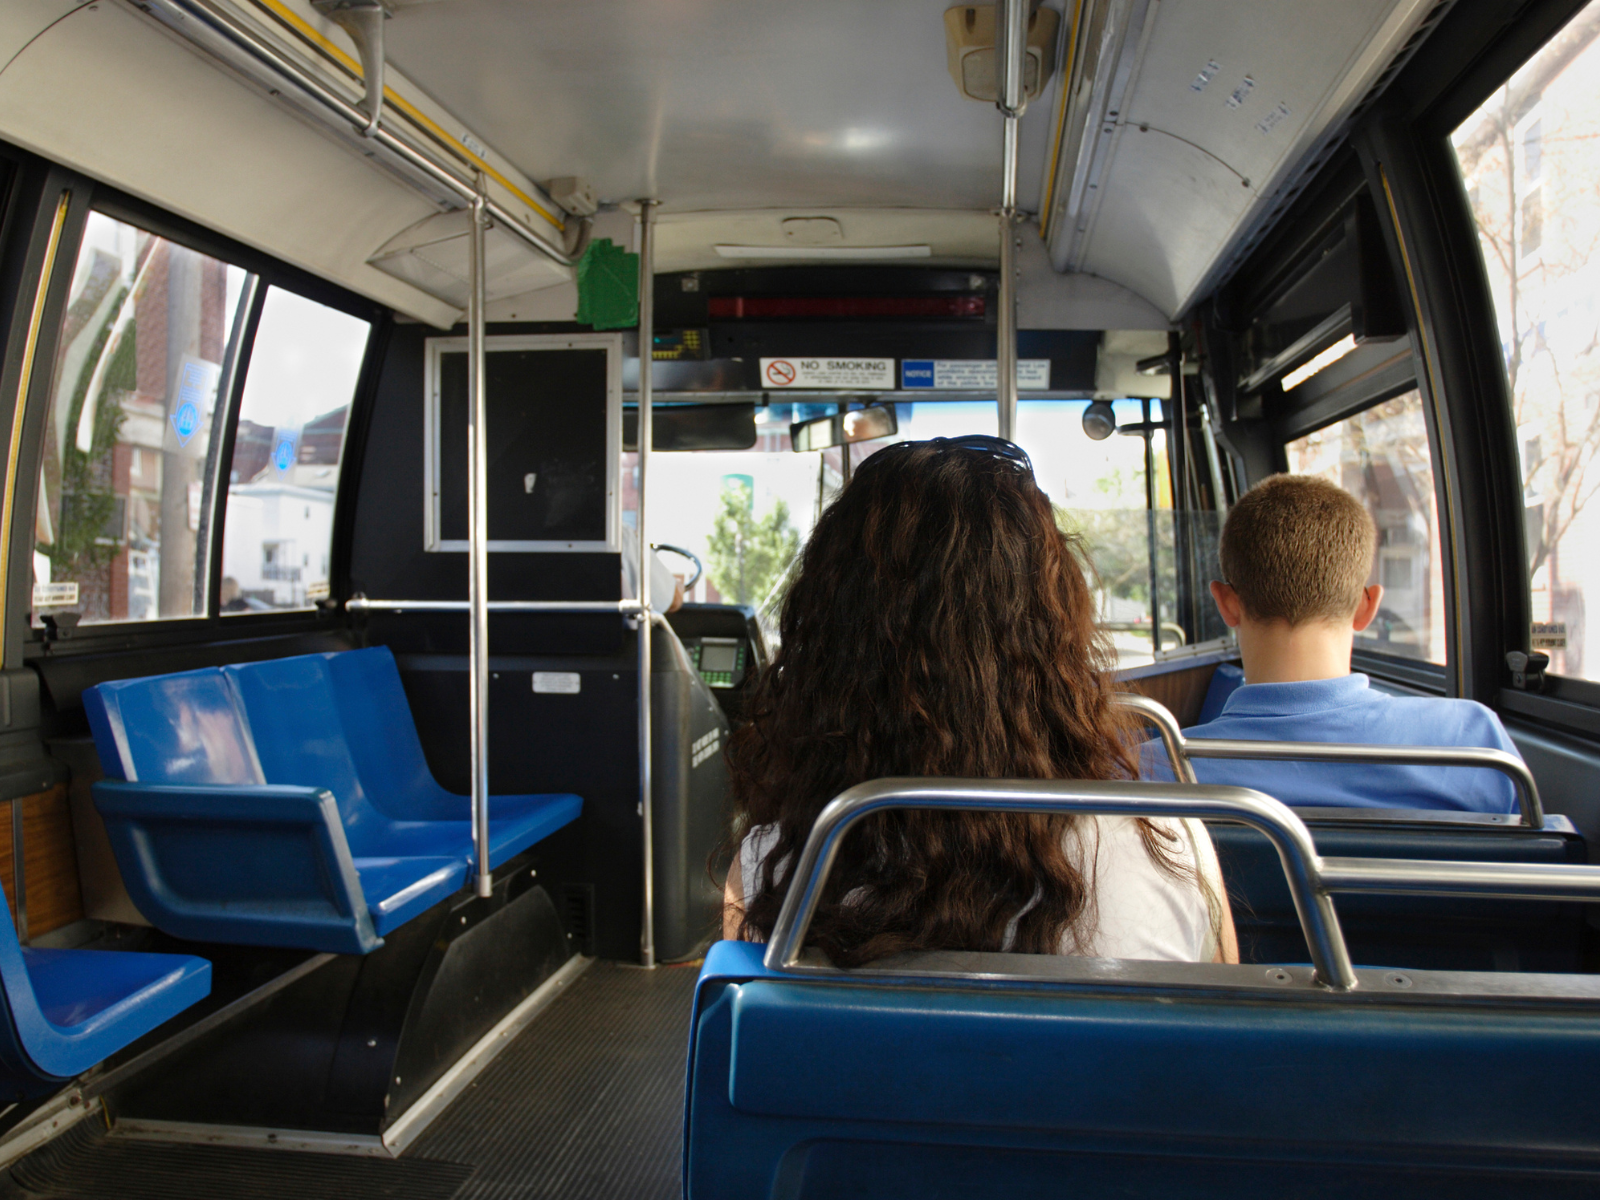 Monthly public transit fares have remained relatively unchanged since 2020